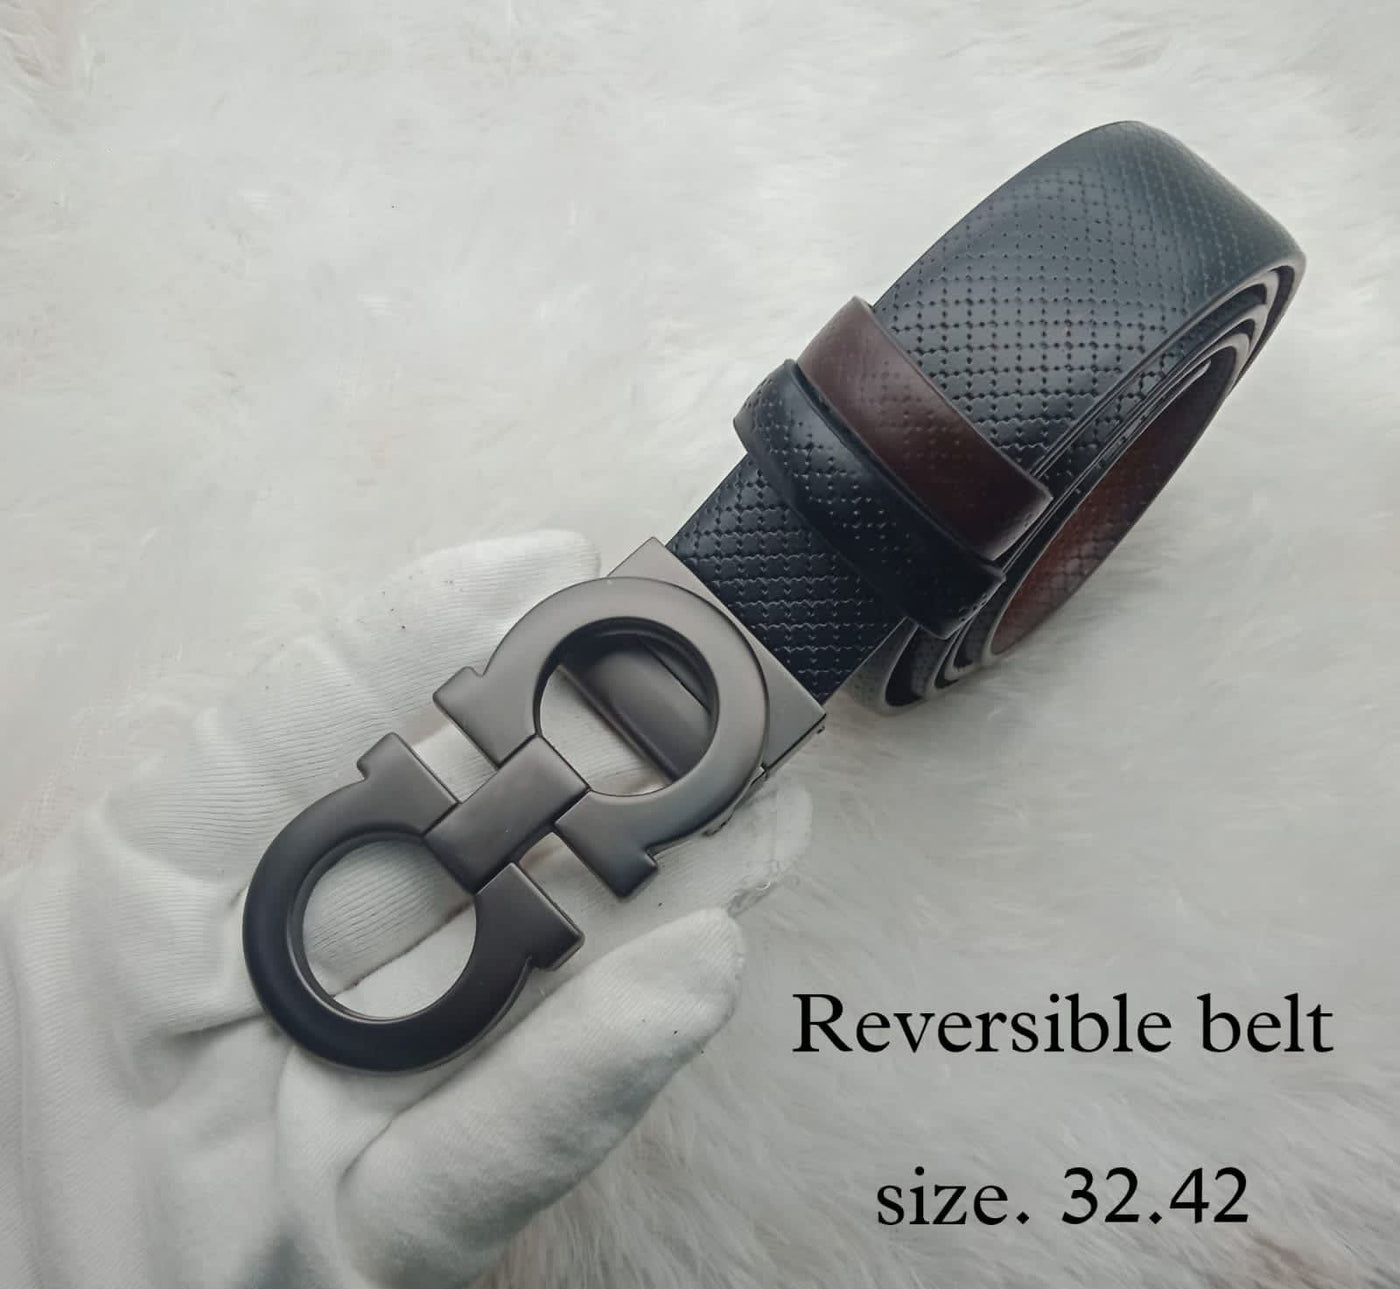 Fashionable Luxury Smooth Designer Reversible Belt For Men-Unique and Classy